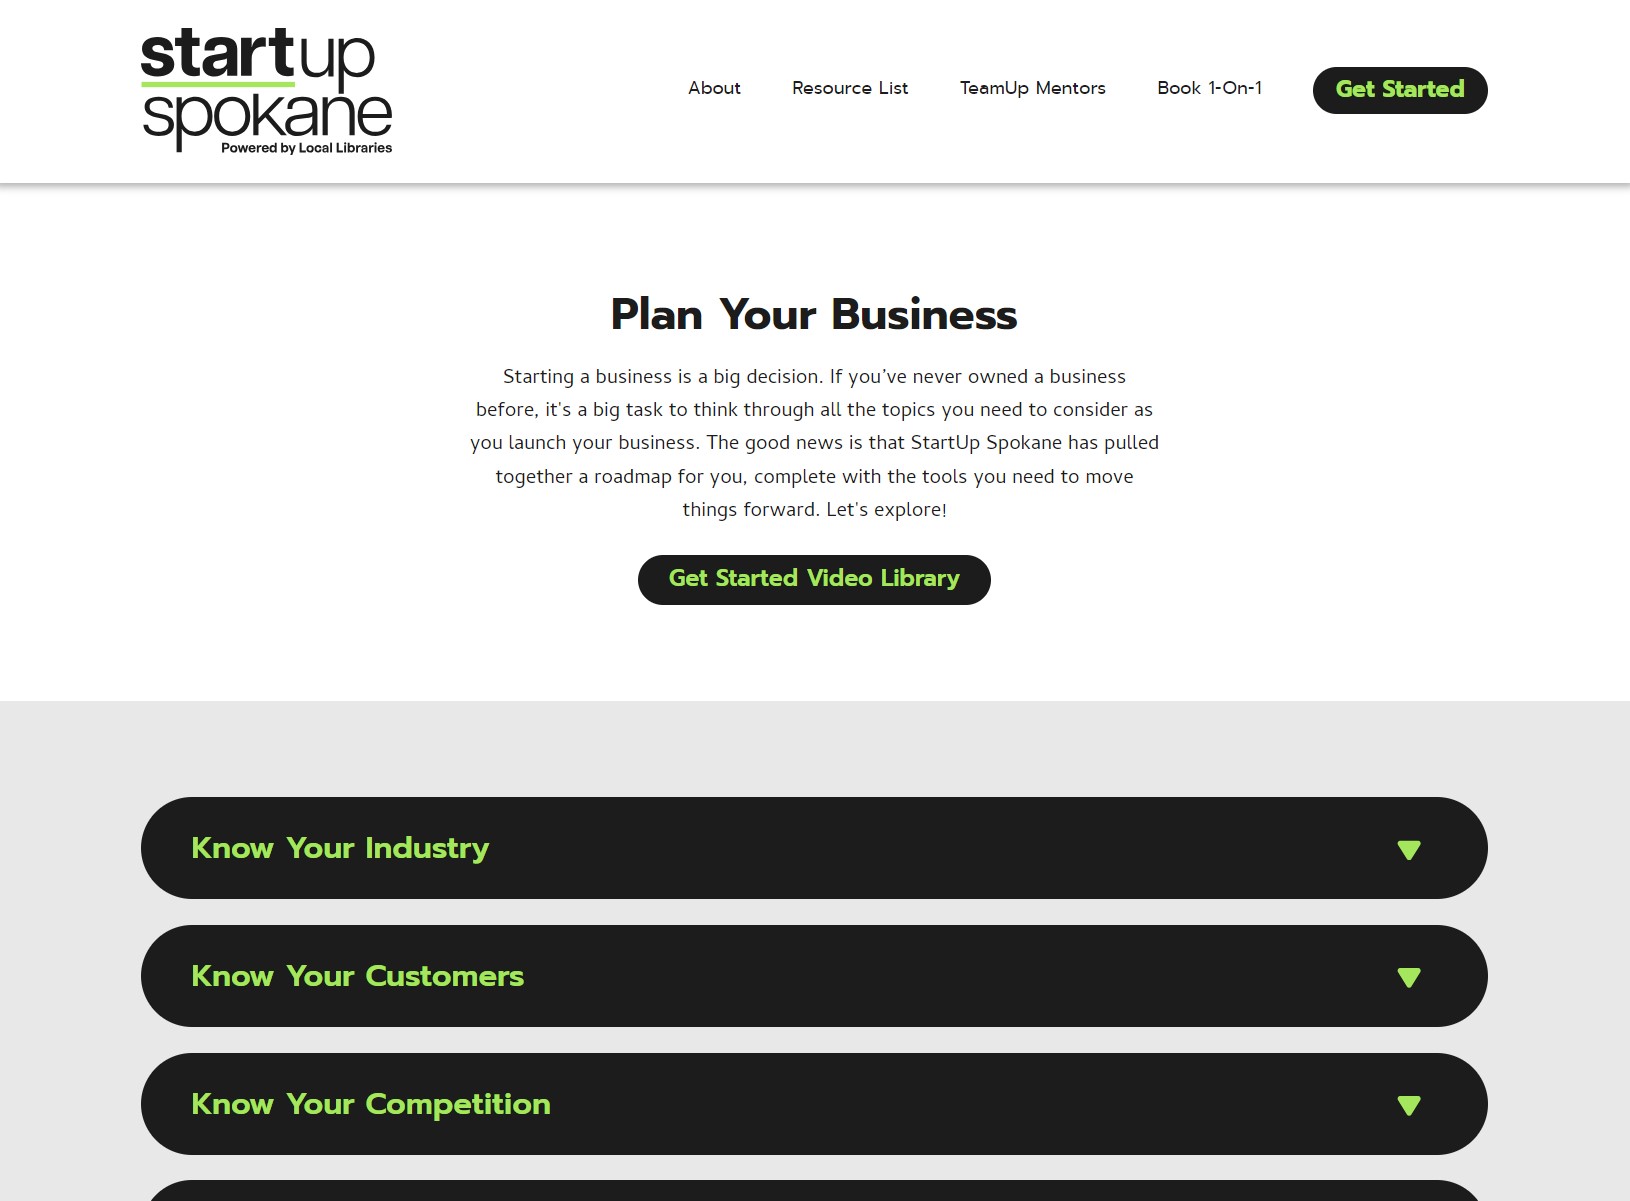 Screenshot of the "Get Started" Plan Your Business webpage for the StartUp Spokane website